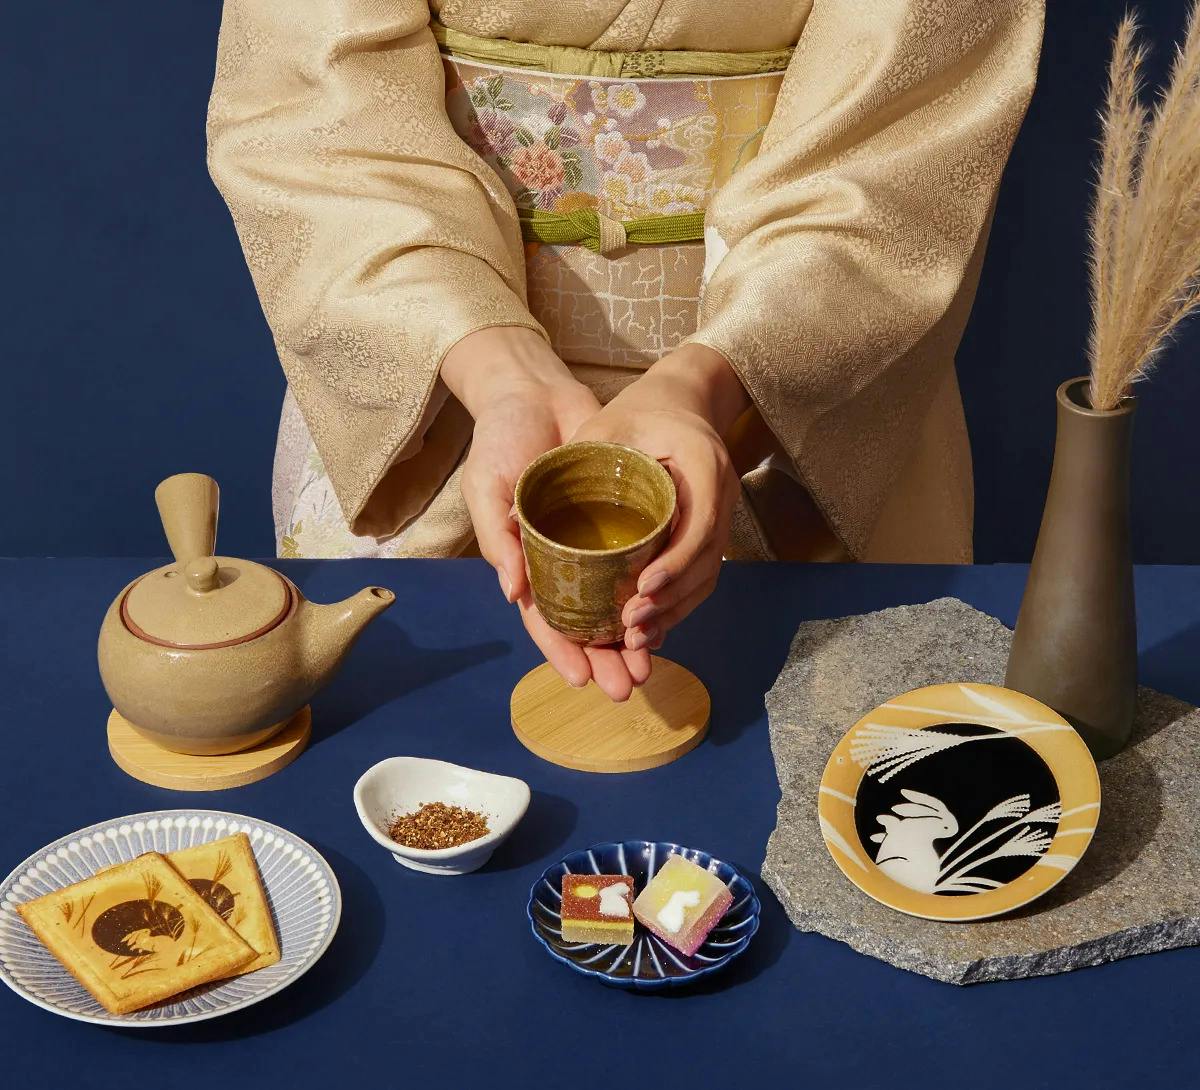 A woman dressed in a kimono sits pouring tea, with traditional snacks